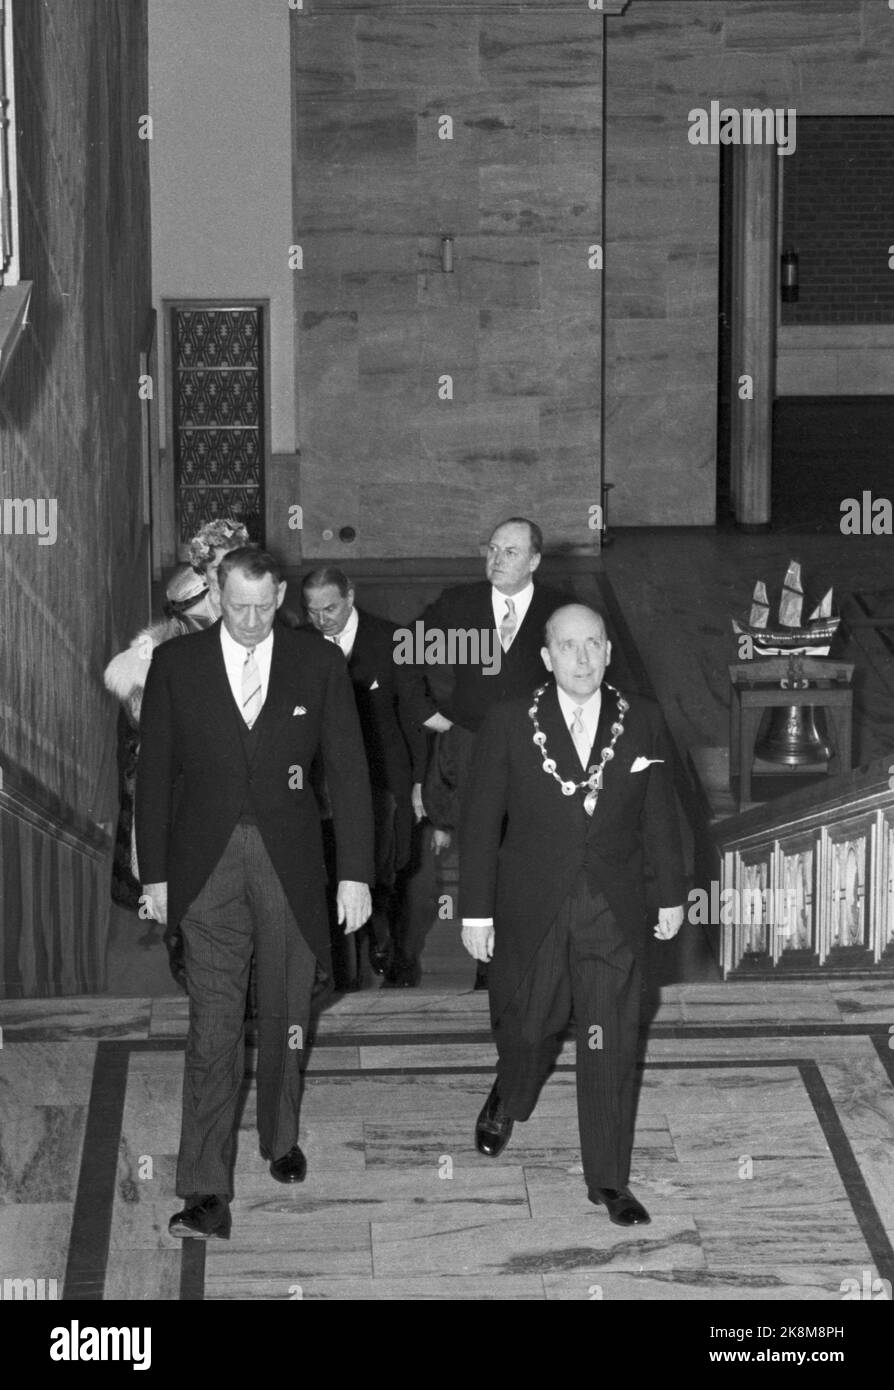 Oslo 196002. Queen Ingrid and King Frederik of Denmark on an official visit to Norway. Here on Guided tour of Oslo City Hall together with Mayor Brynjulf Bull (t.h.) King Frederik, Queen Ingrid and King Olav. Photo: NTB Archive / NTB Stock Photo